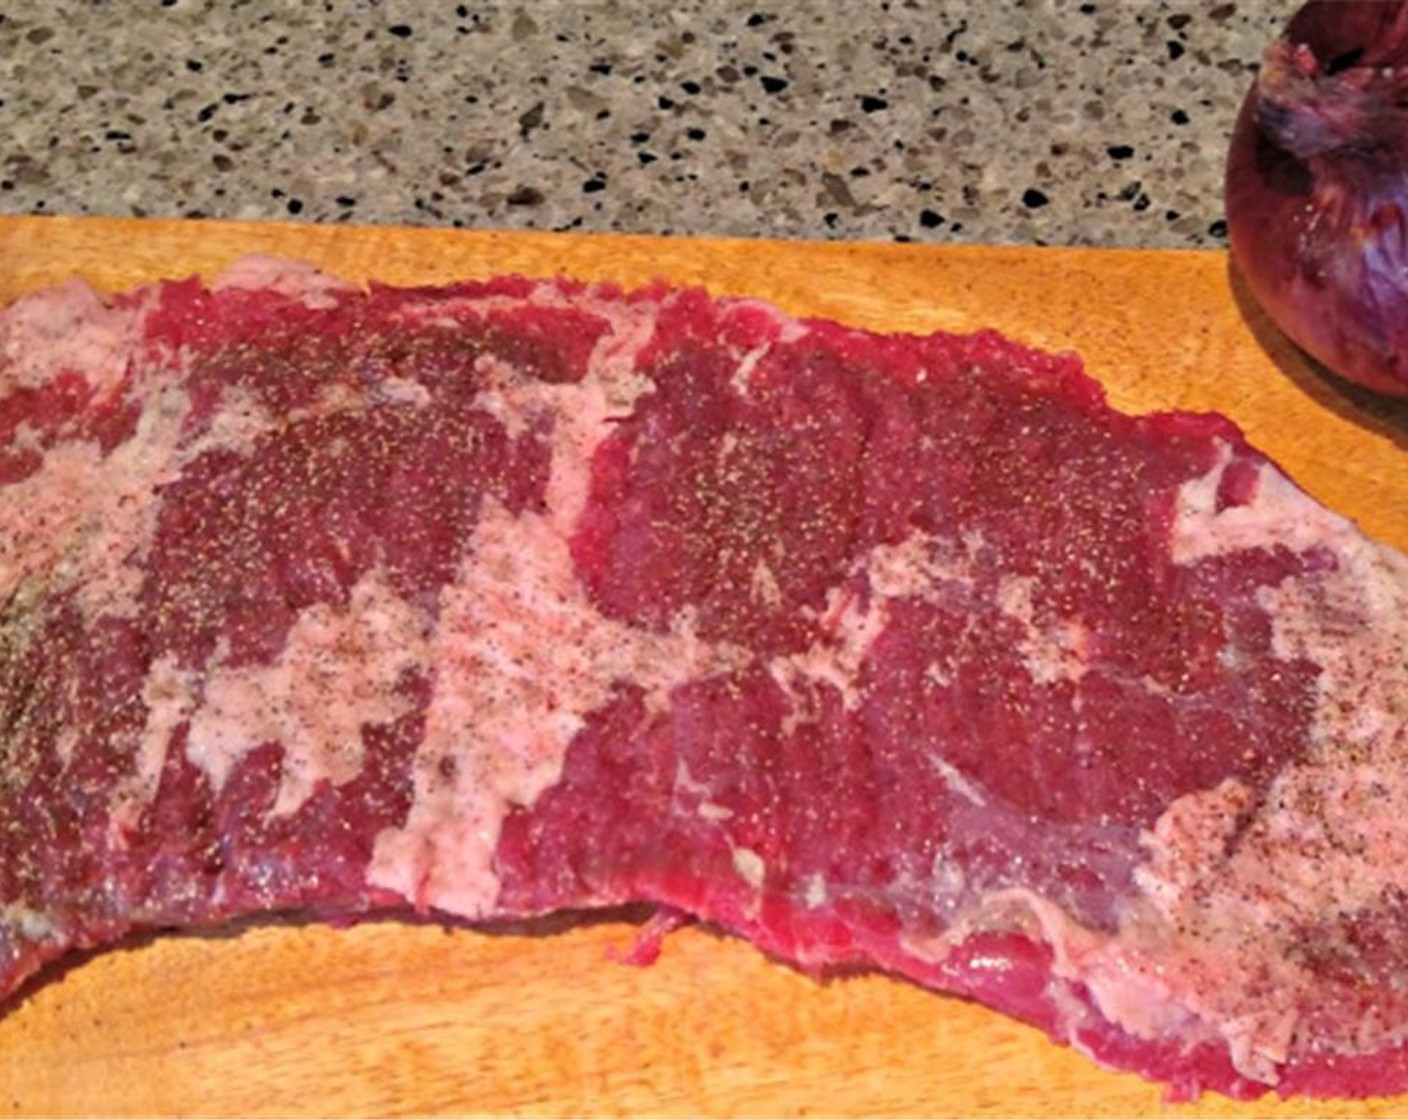 step 2 In a small bowl, mix Salt (1 tsp), Ground Black Pepper (1 tsp), and Chili Powder (1 tsp). Rub mixture over both sides of the steak and let that puppy rest for 20 minutes at room temperature.